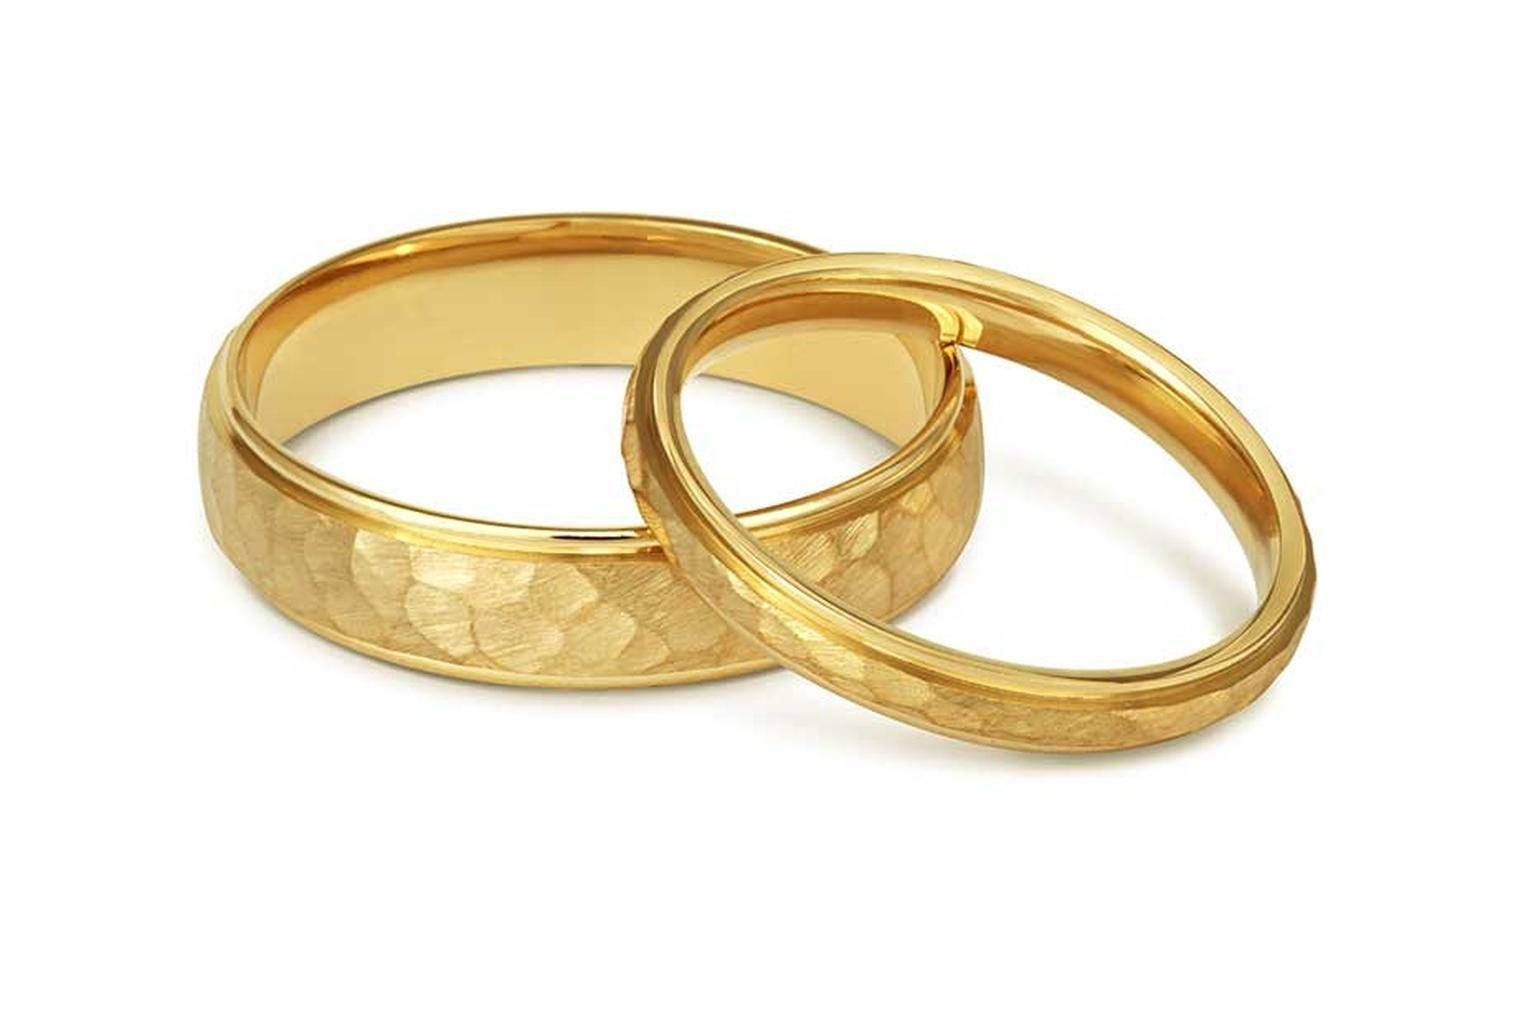 Our Pick Of Ethical Wedding Rings To Celebrate The Start Of Within Ethical Wedding Bands (View 10 of 15)